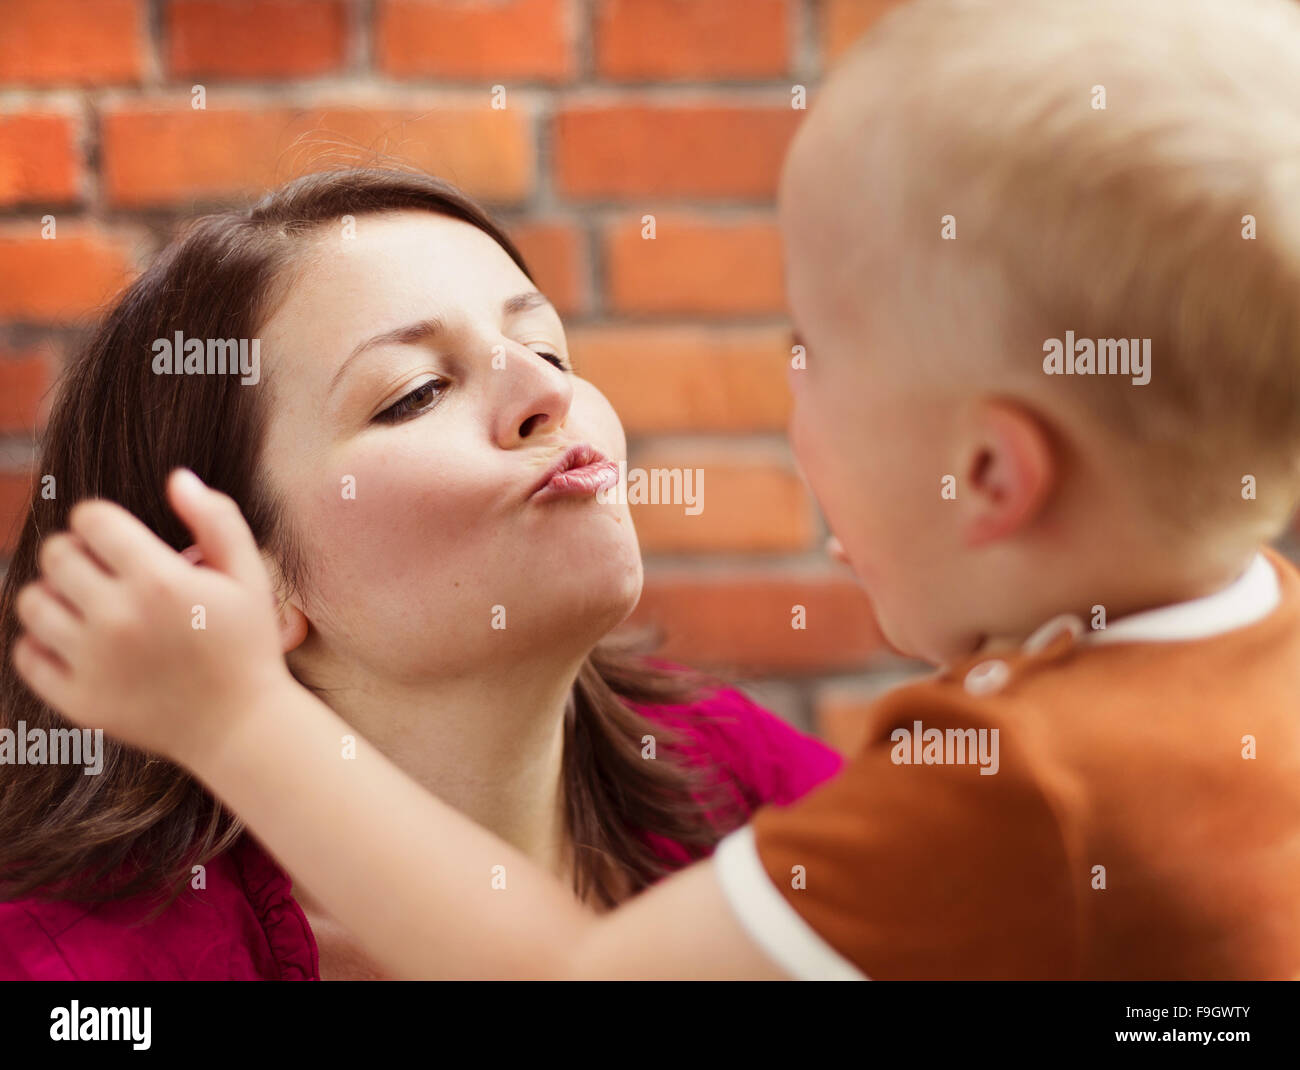 Mother and son making funny faces together on a brick wall background Stock Photo